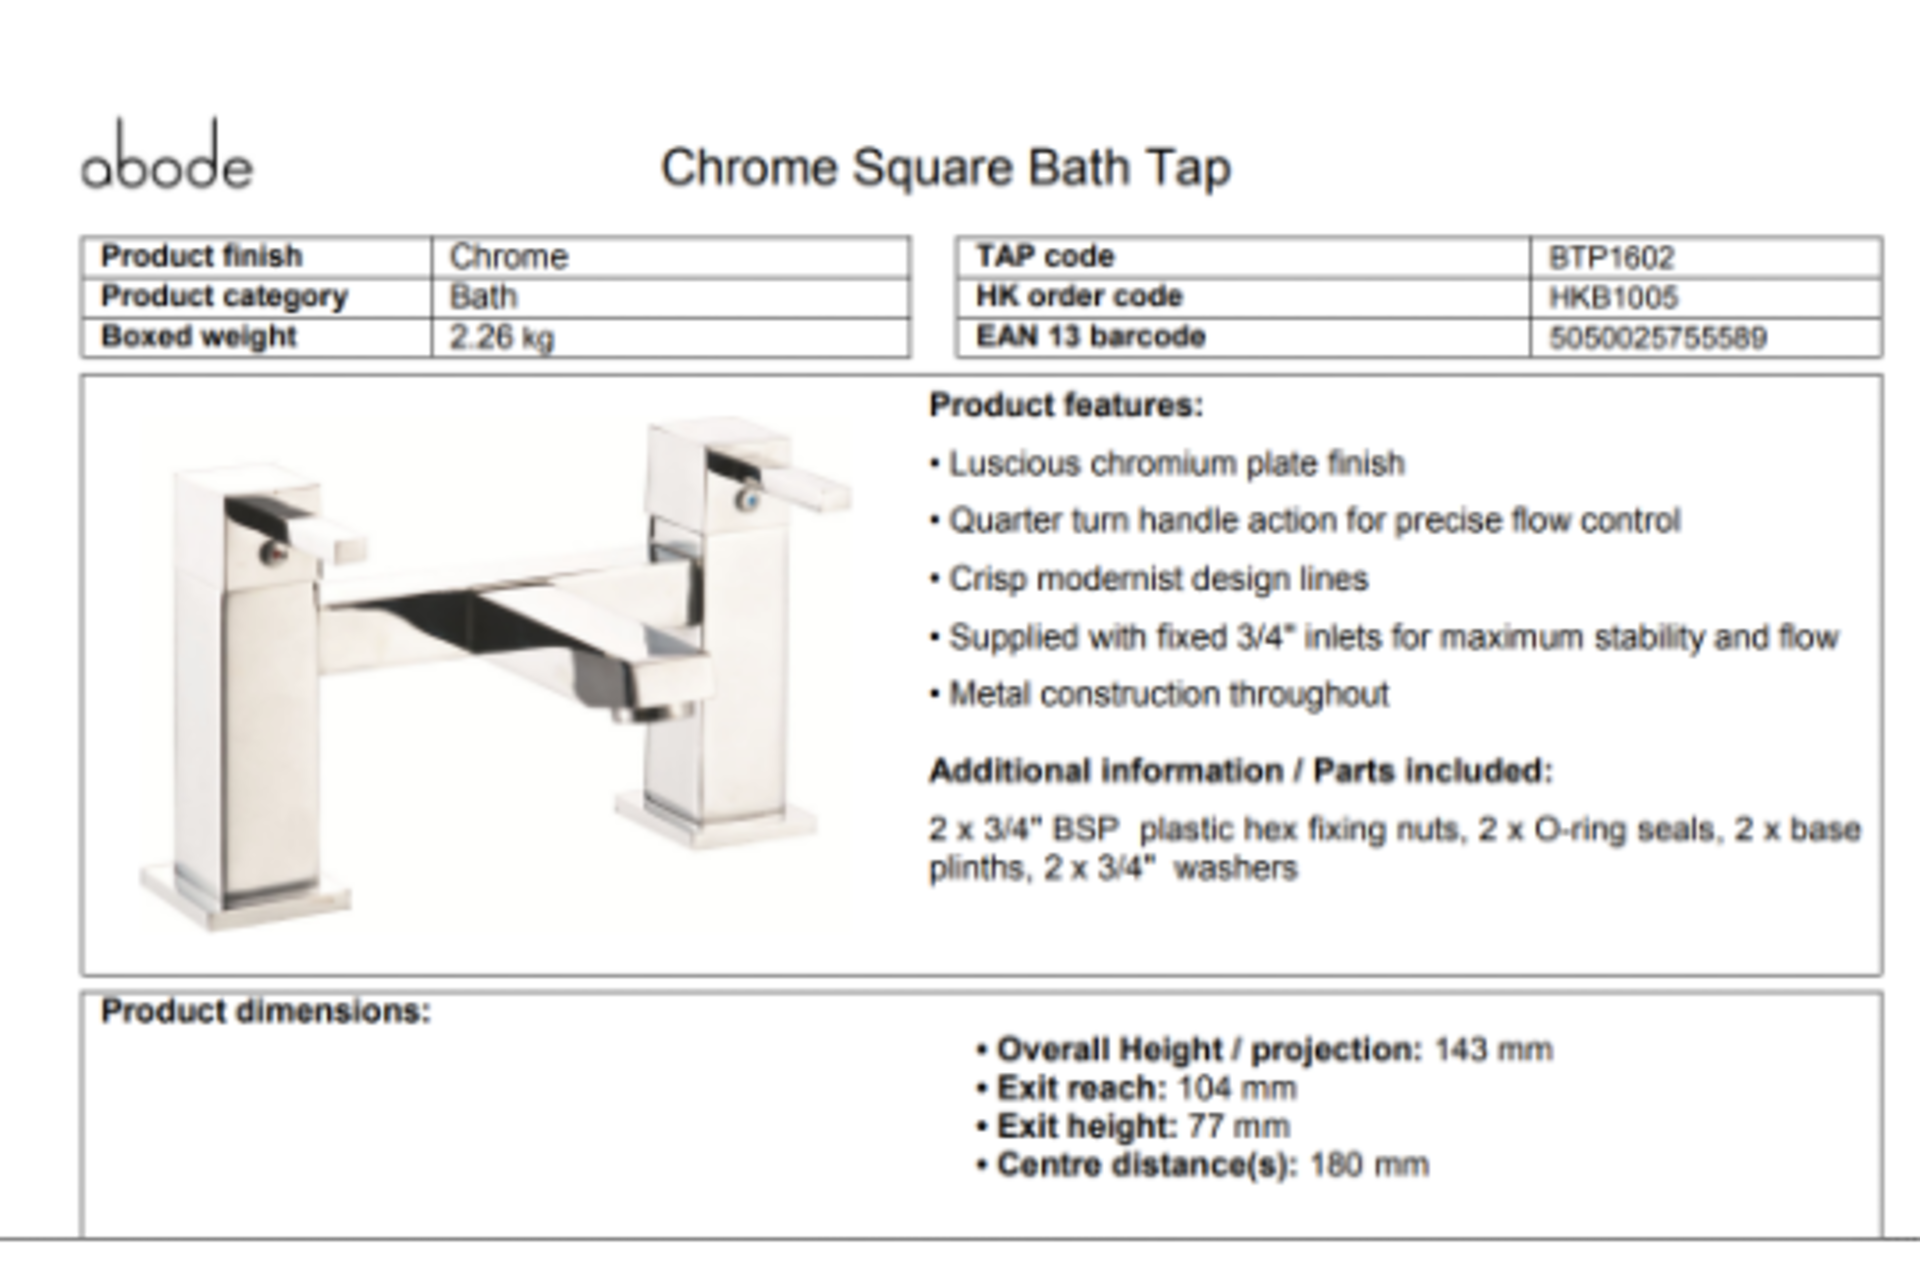 2 x NEW BOXED Abode Lamona CONTEMPORARY CHROME BATH TAPS. RRP £129.99 EACH, GIVING THIS LOT A - Image 2 of 4